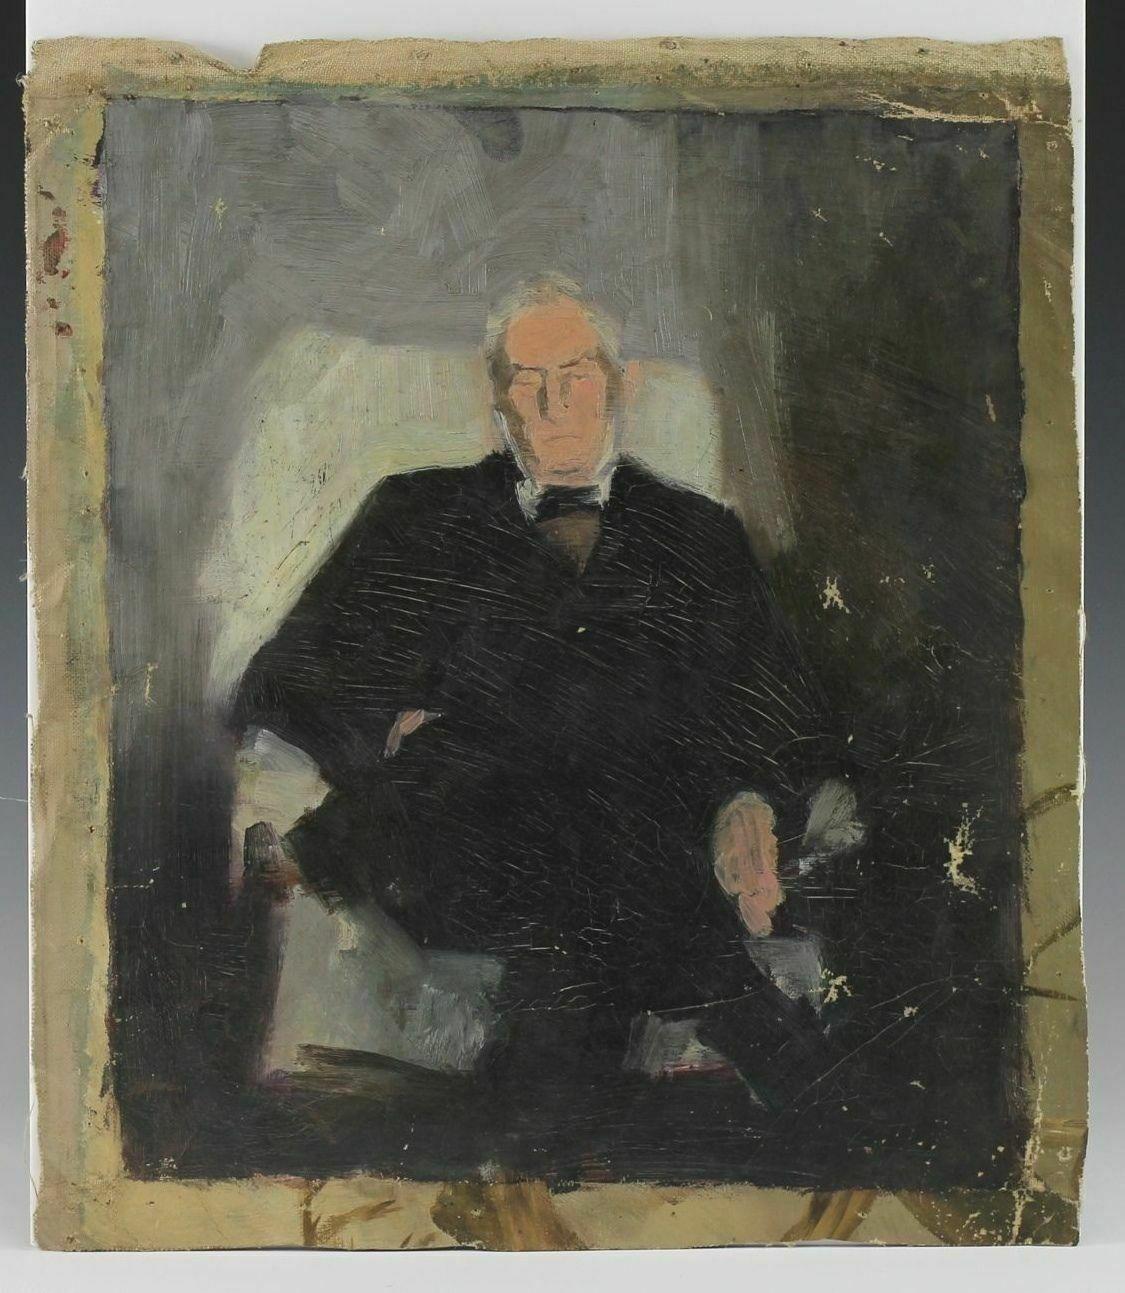 Alice Righter Edmiston Oil on Canvas Portrait Seated Man

Portrait of seated man in black suit, unsigned.

Additional Information:
Painting Surface: Canvas 
Features: Signed
Region of Origin: United States 
Size Type/Largest Dimension: Small